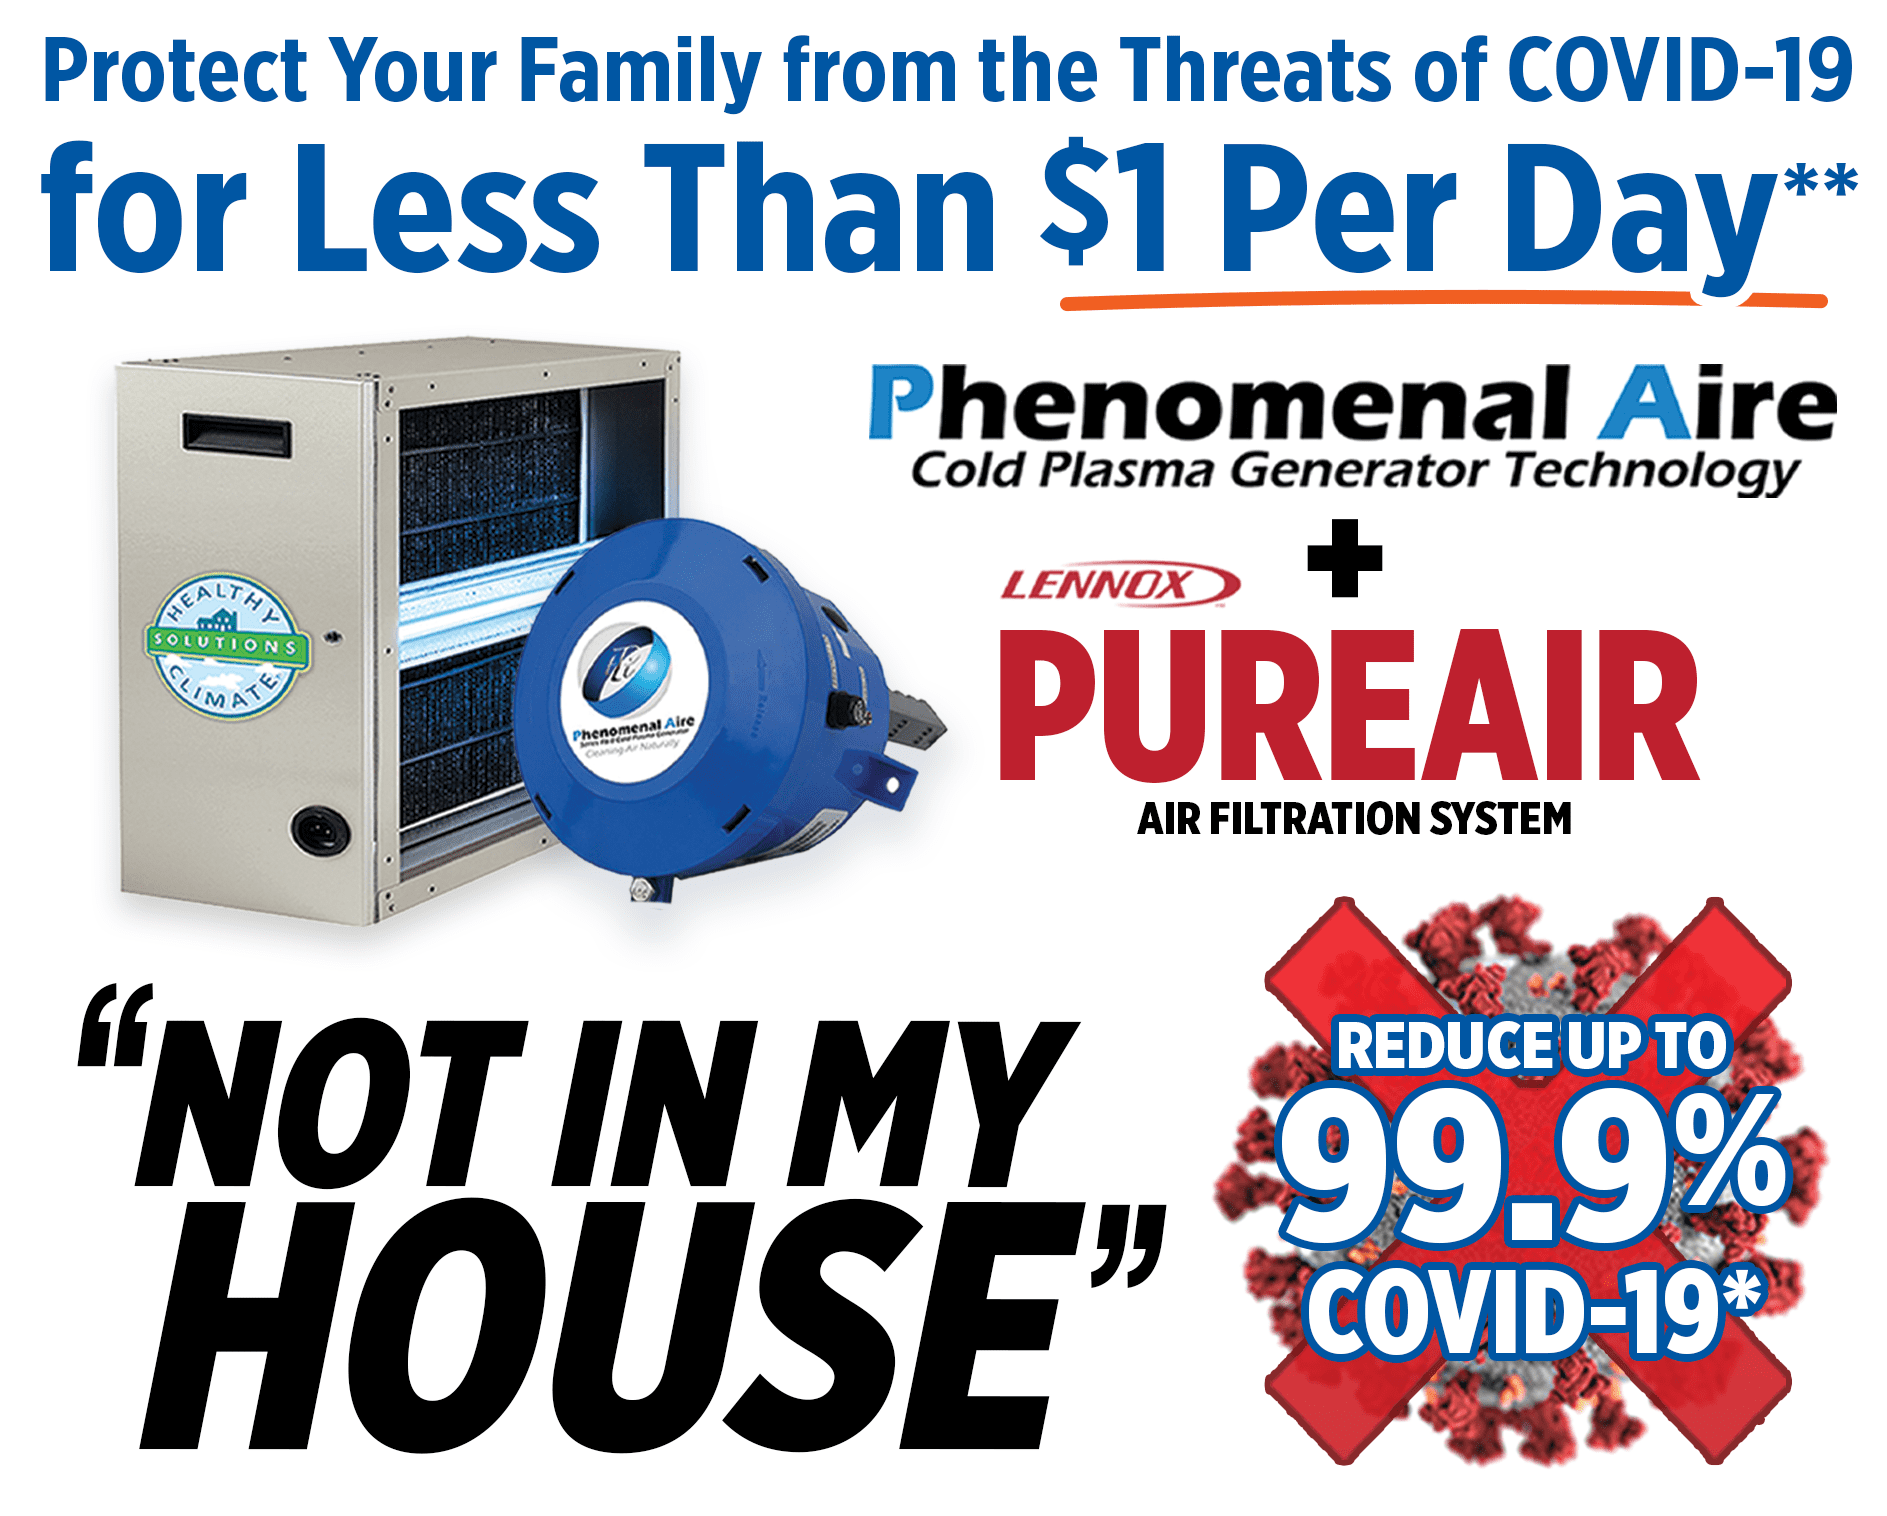 protect your indoor air quality from the threats of COVID-19 with pureair air filtration system and reduce up to 99.9% COVID-19